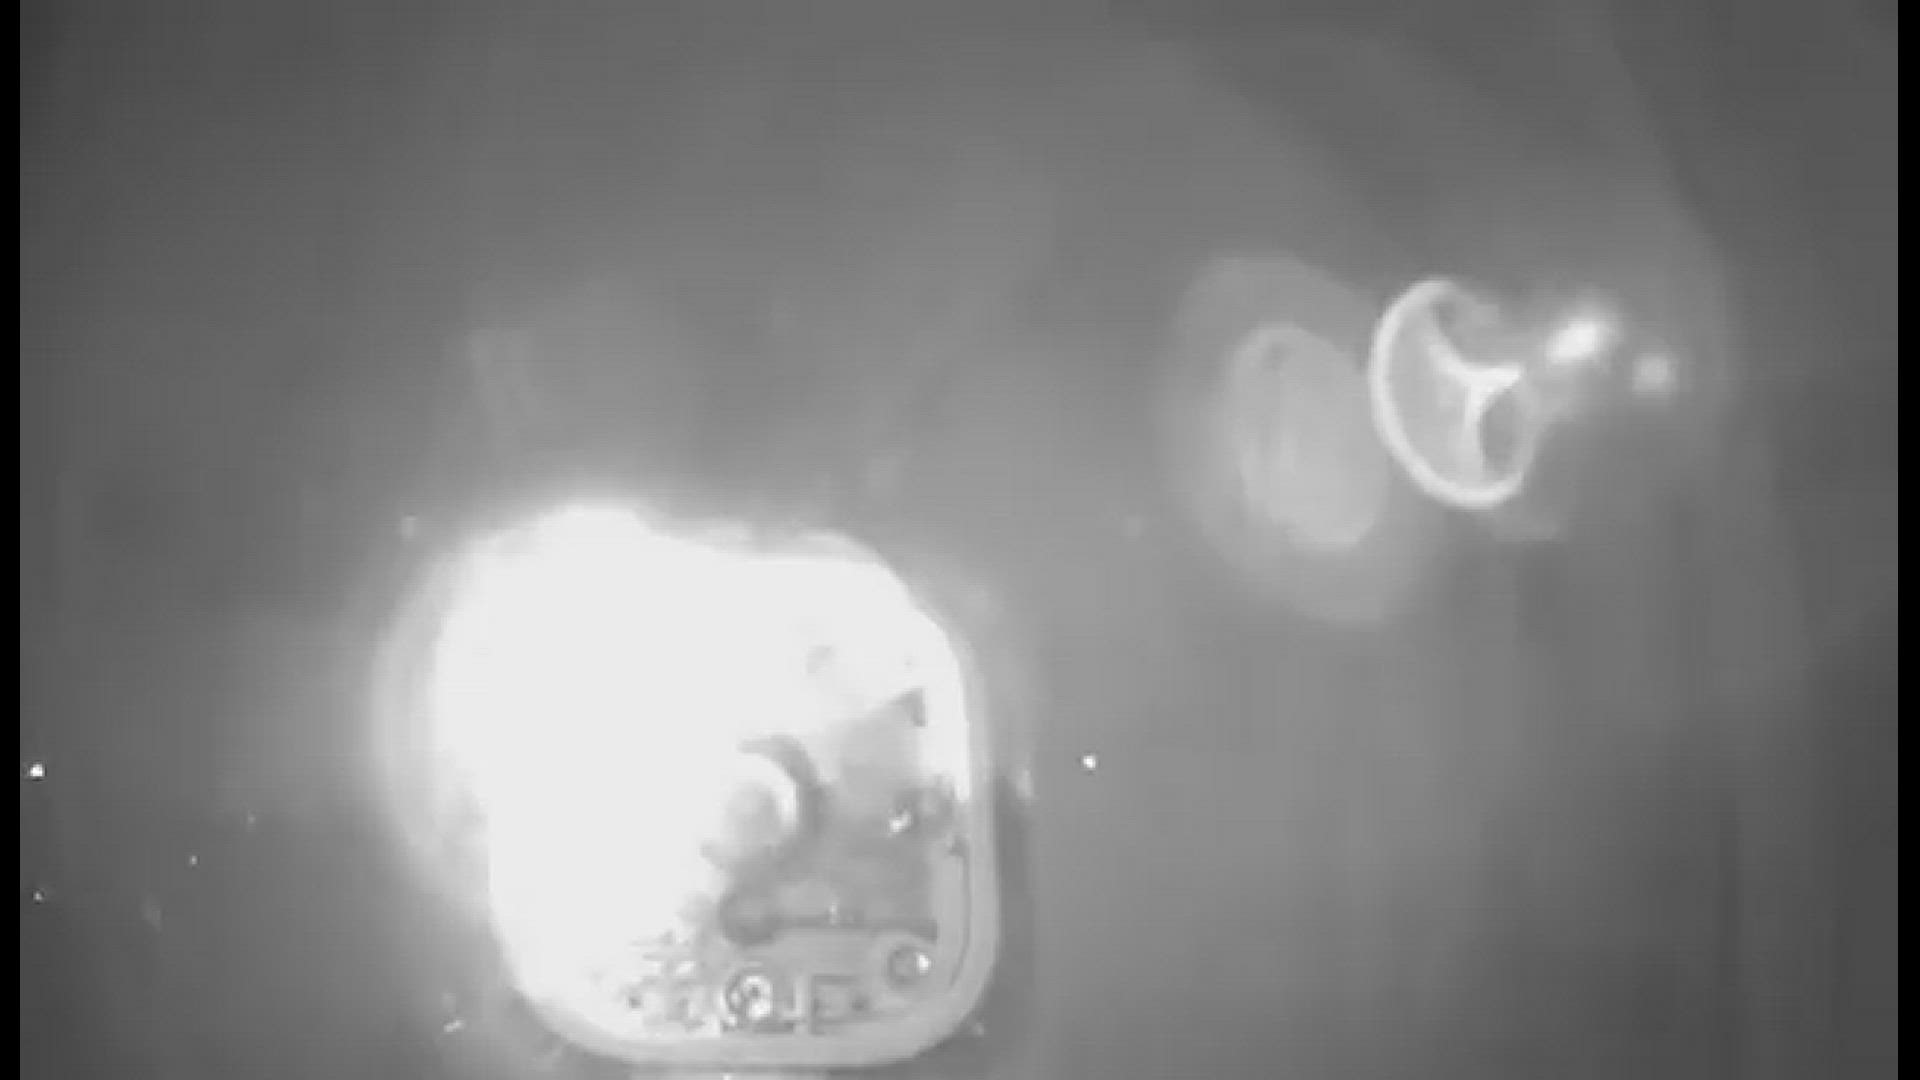 A nearby resident's doorbell camera captured the moment when an explosion occurred in an apartment in Franklin, Virginia